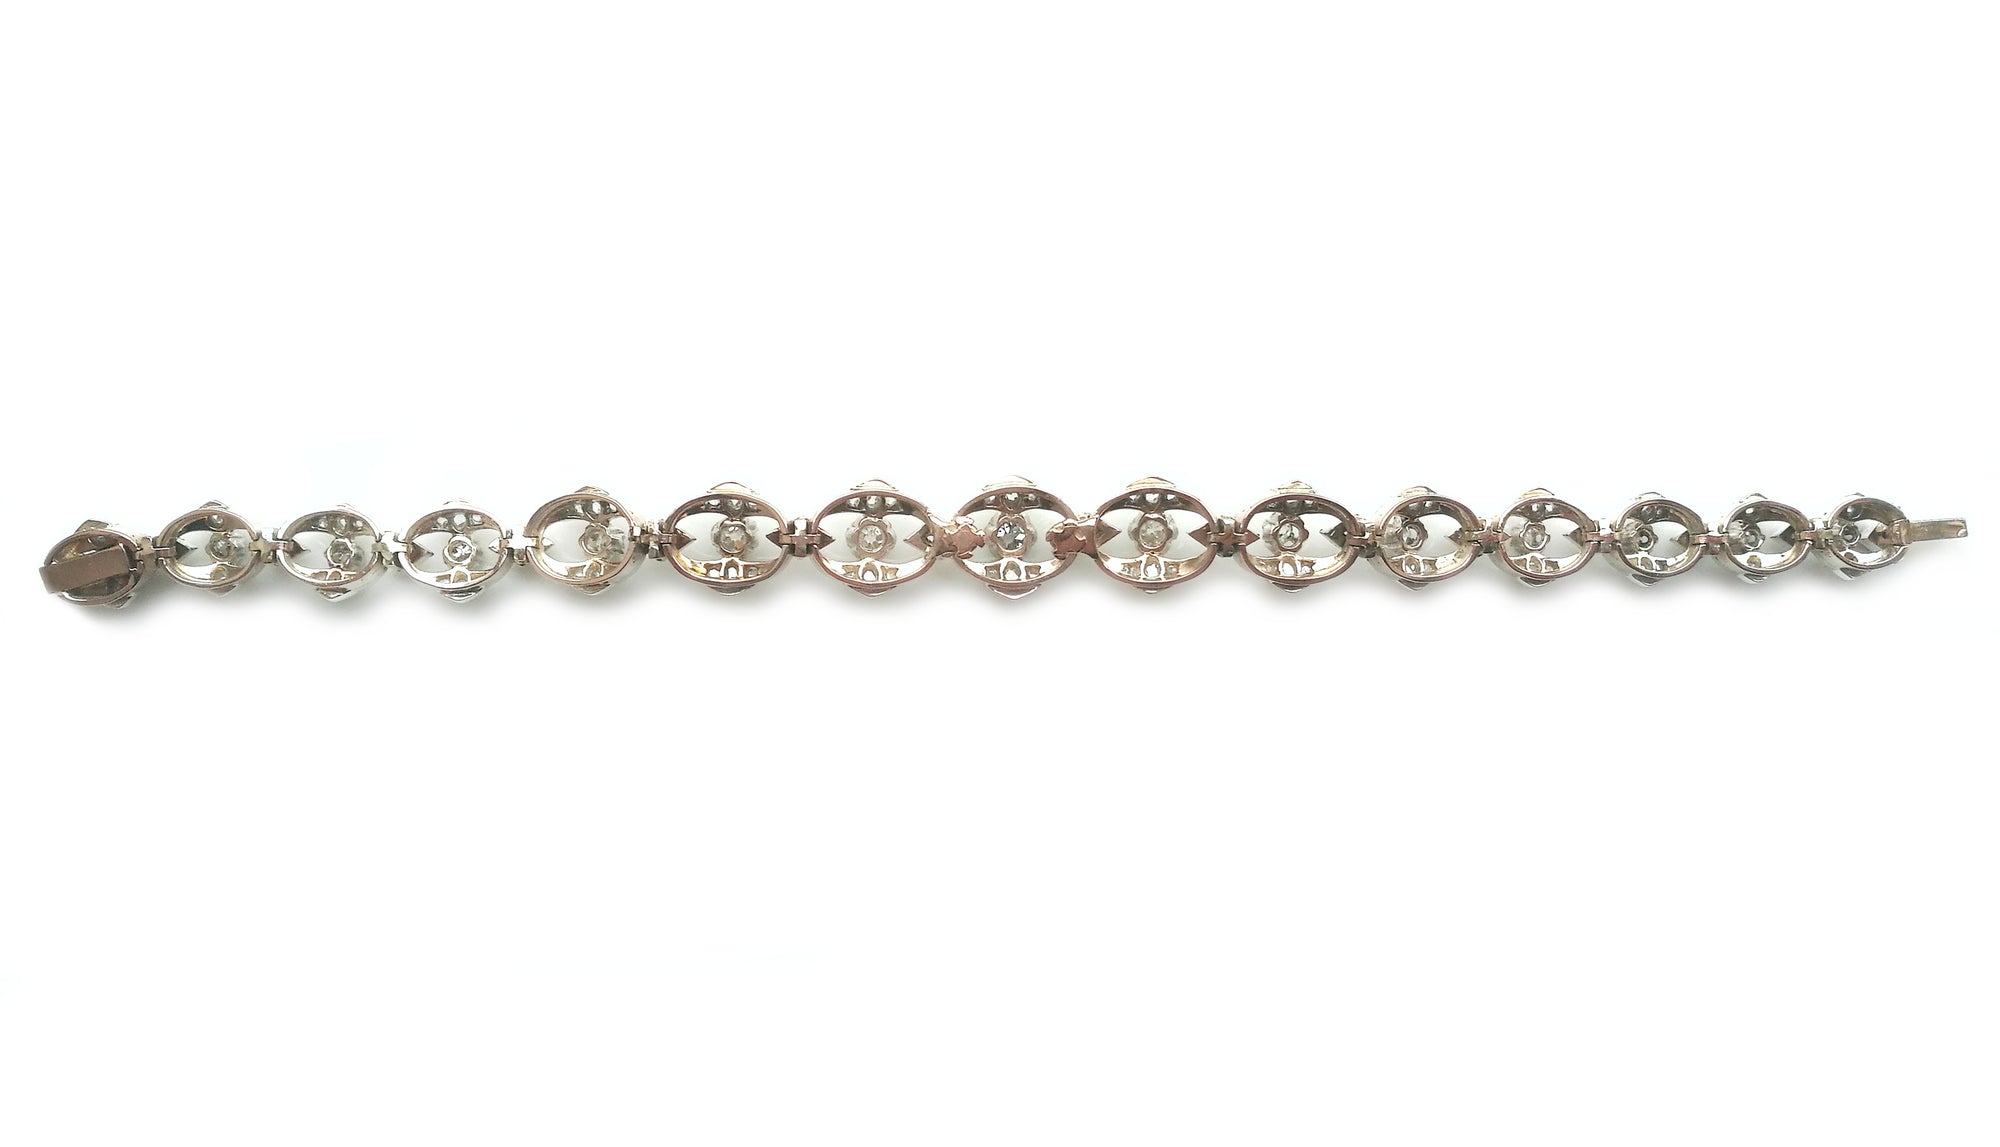 Antique French Victorian 4.50ct Old Cut Diamond Bracelet in Silver & 18k Gold